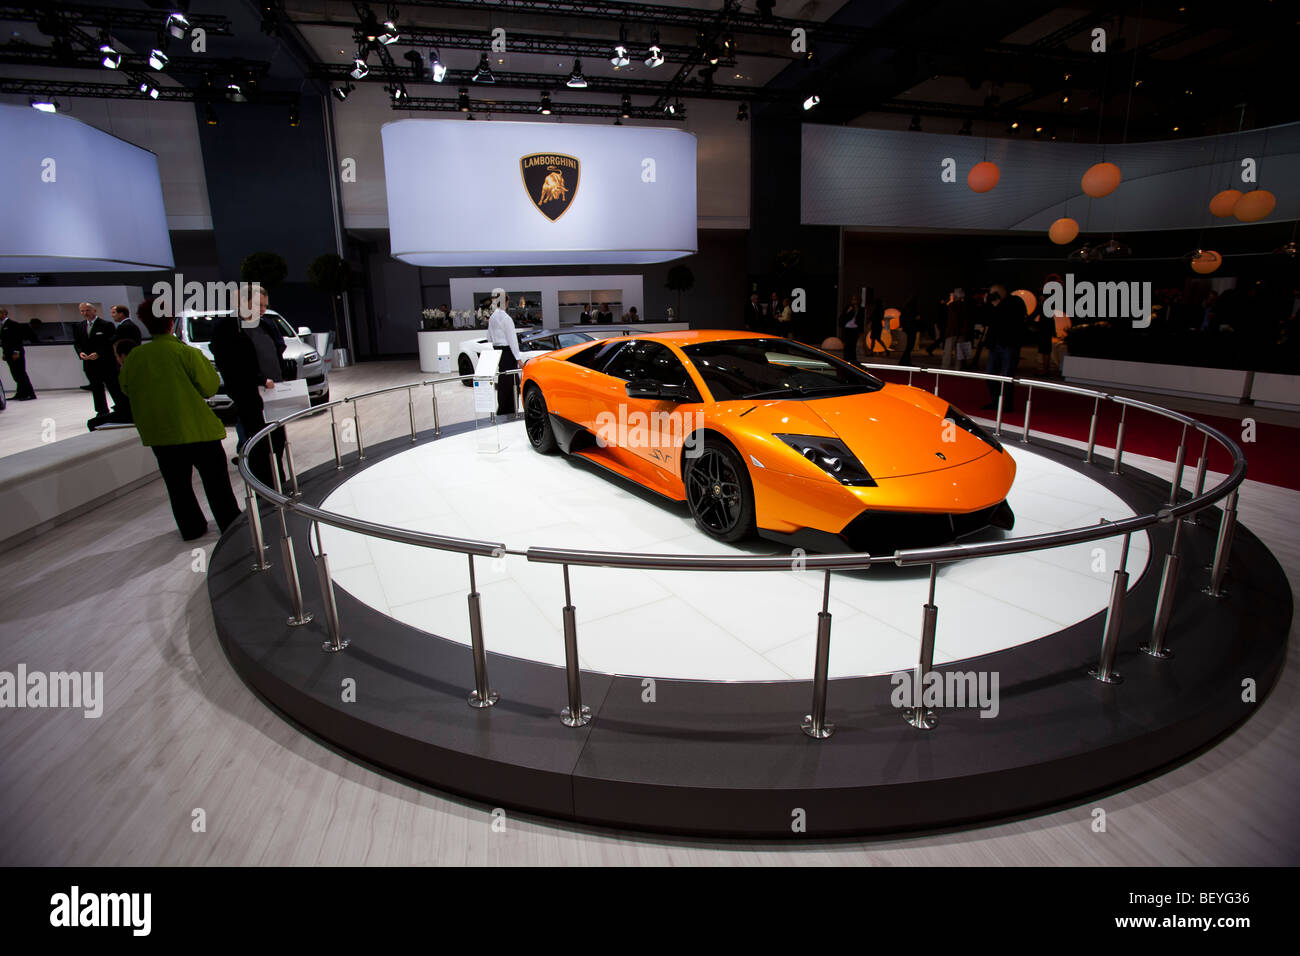 Lamborghini is seen at an automobile show of the Volkswagen AG in Hamburg, Germany. Stock Photo